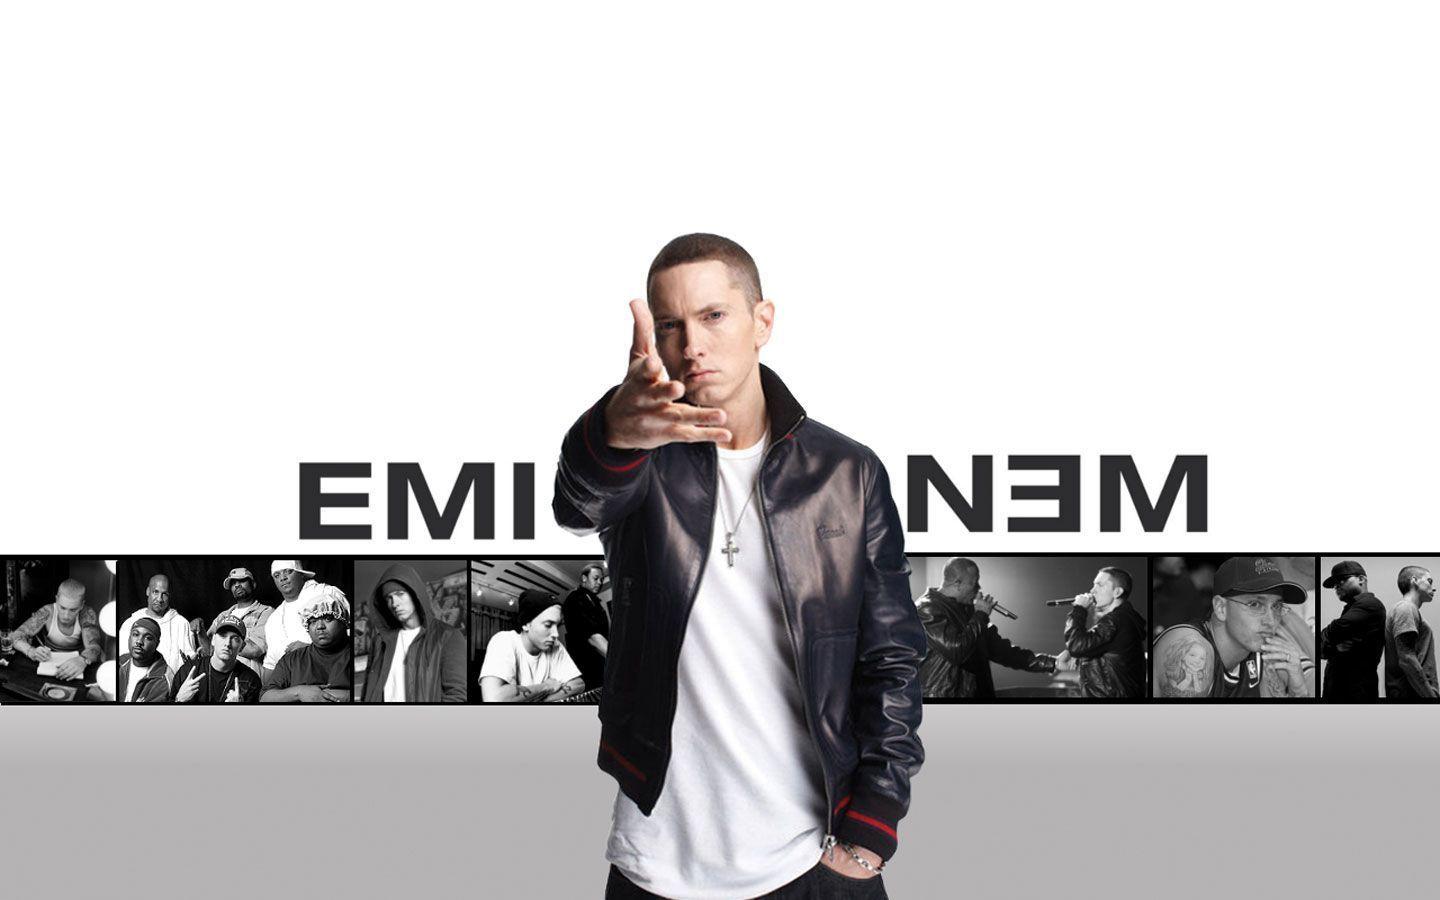 Eminem shares exclusive studio footage of 'My name is'. Wotpost